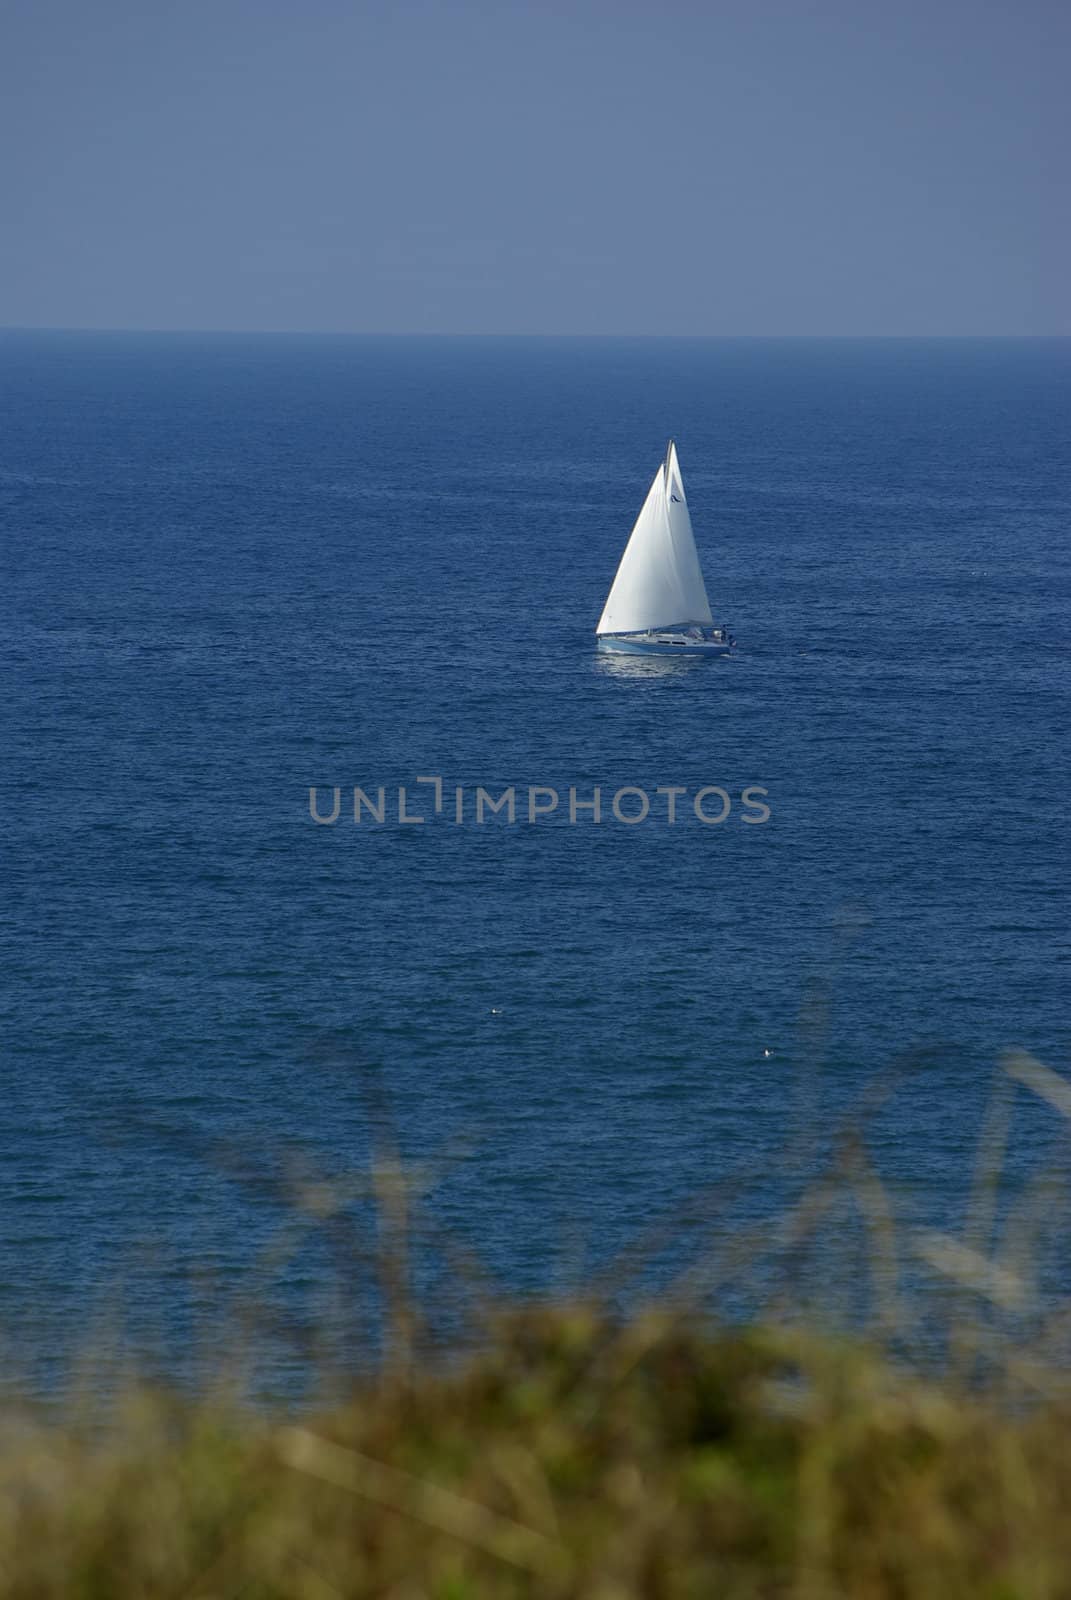 This is a white yacht on a very quiet blue sea